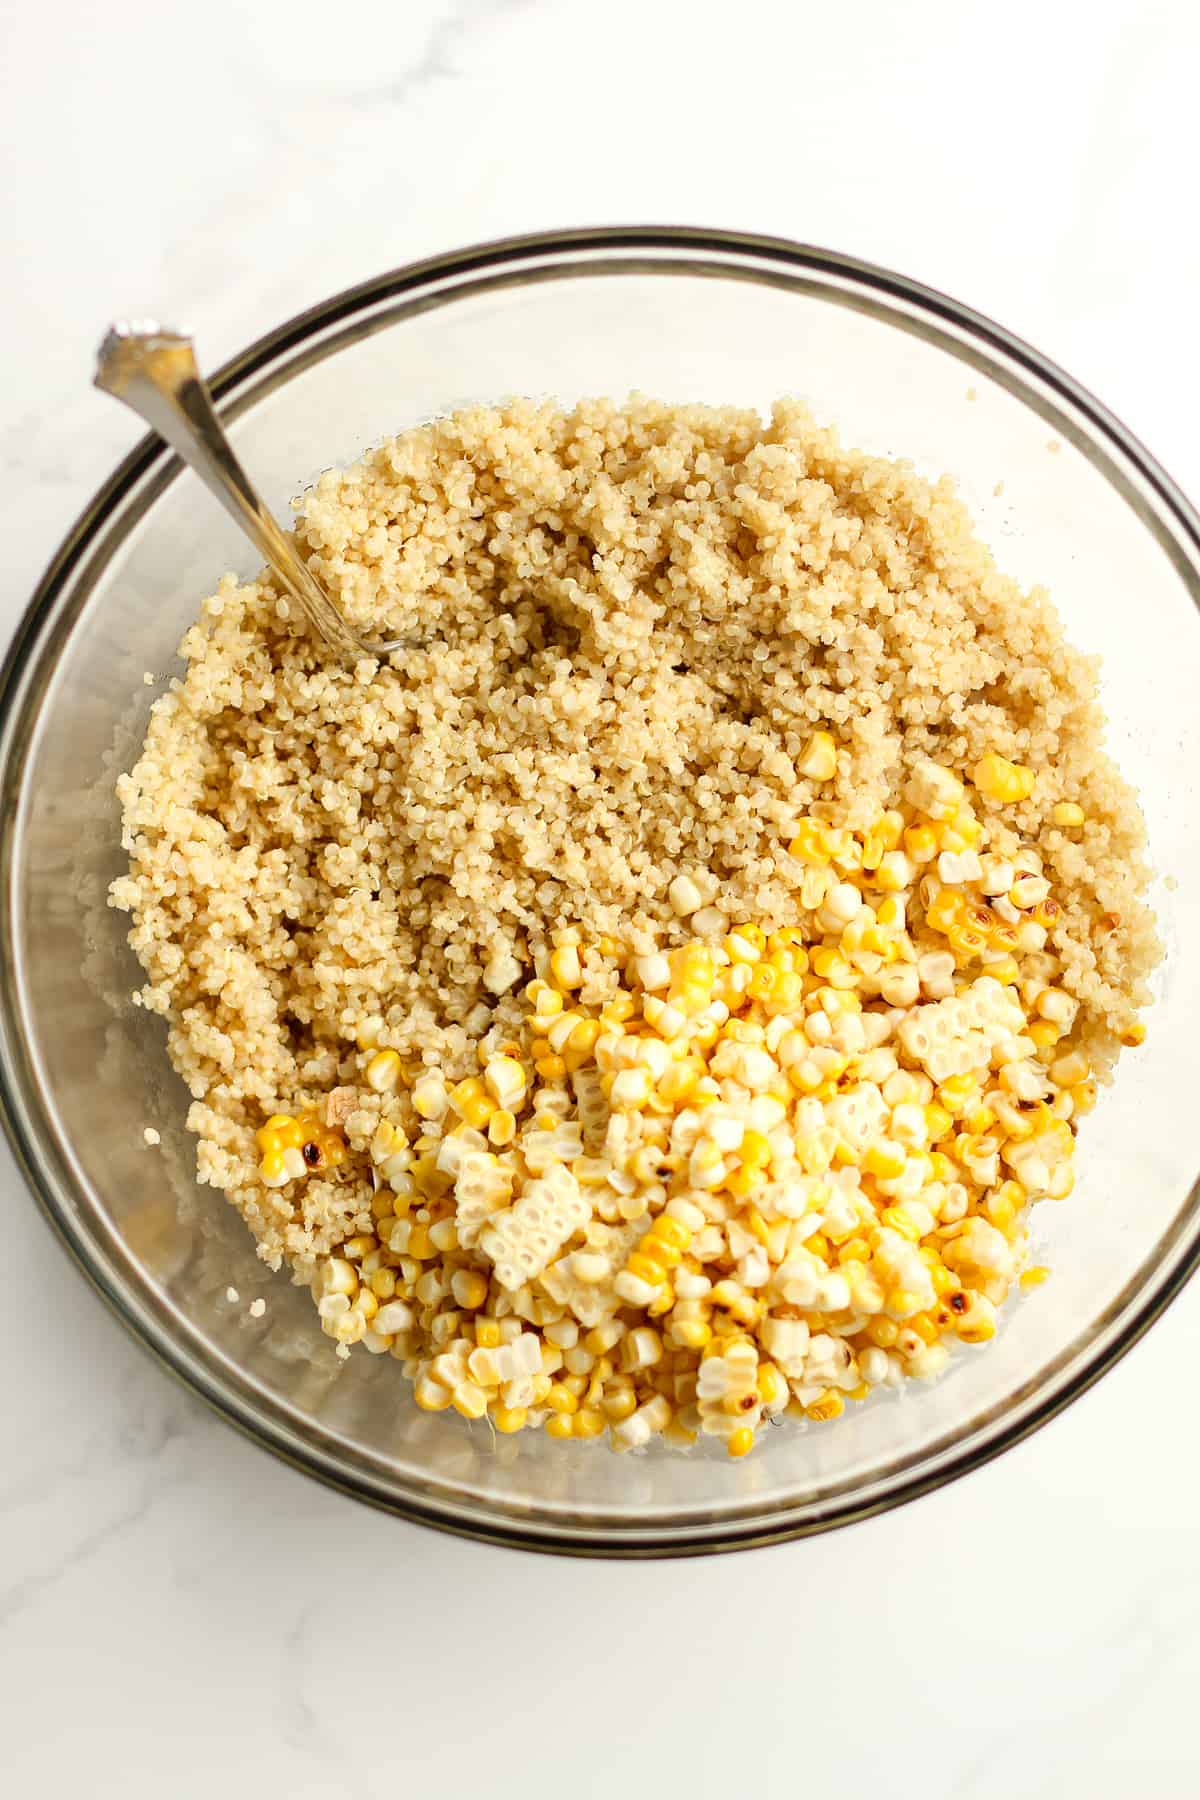 A bowl of the quinoa and corn.